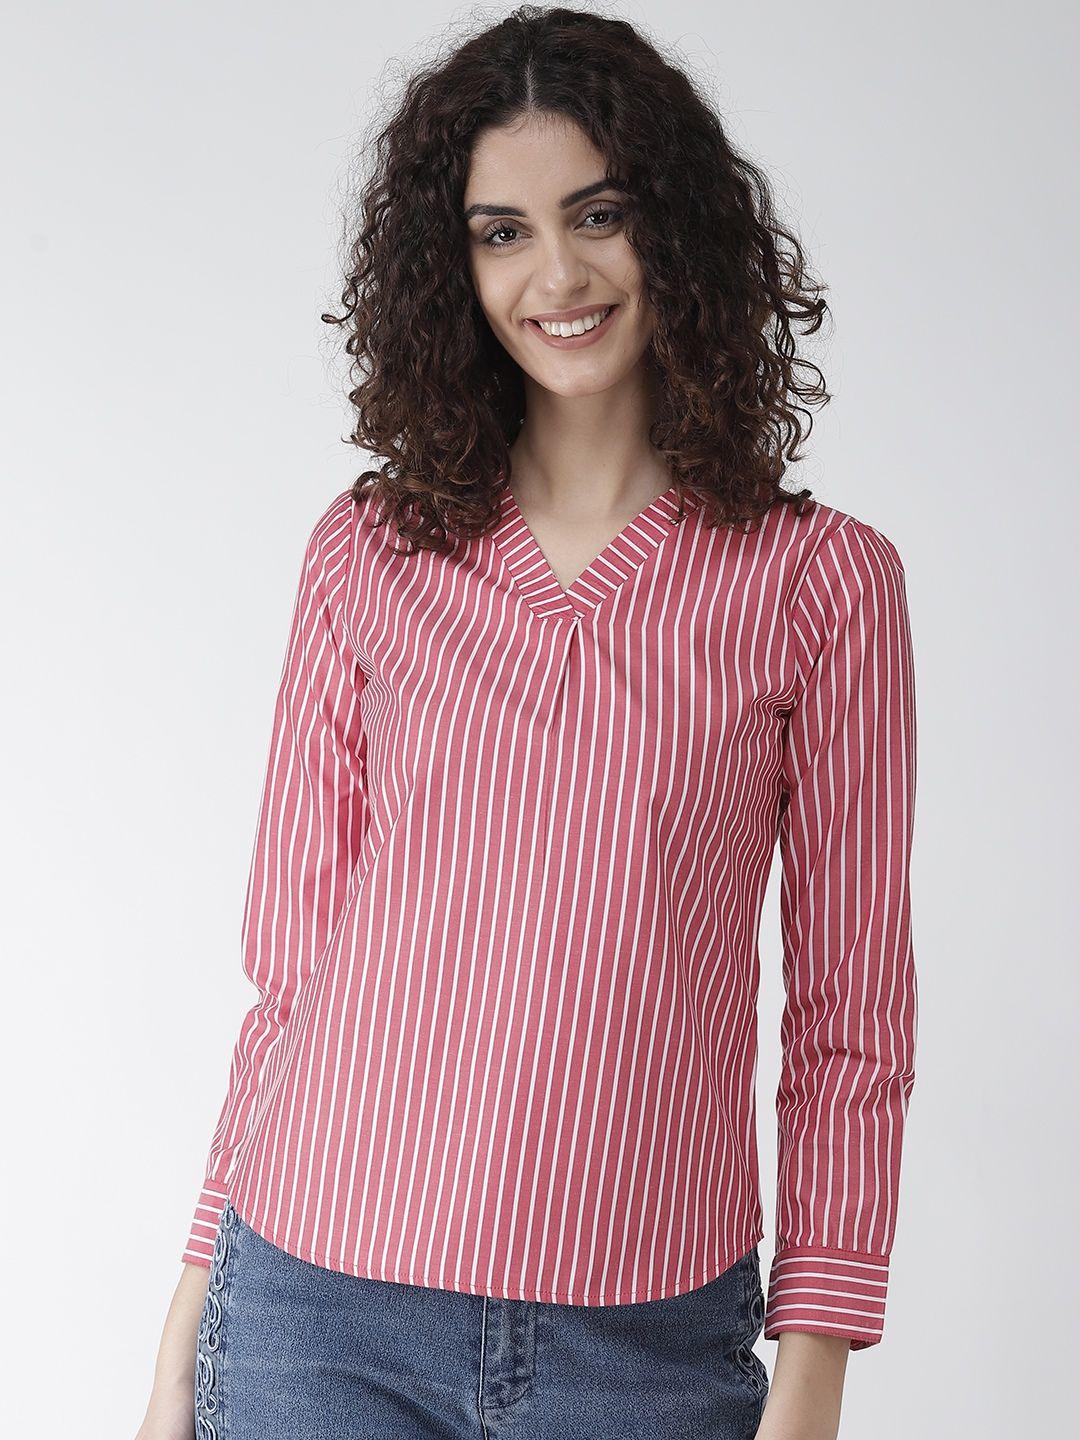 style quotient women red & white striped top